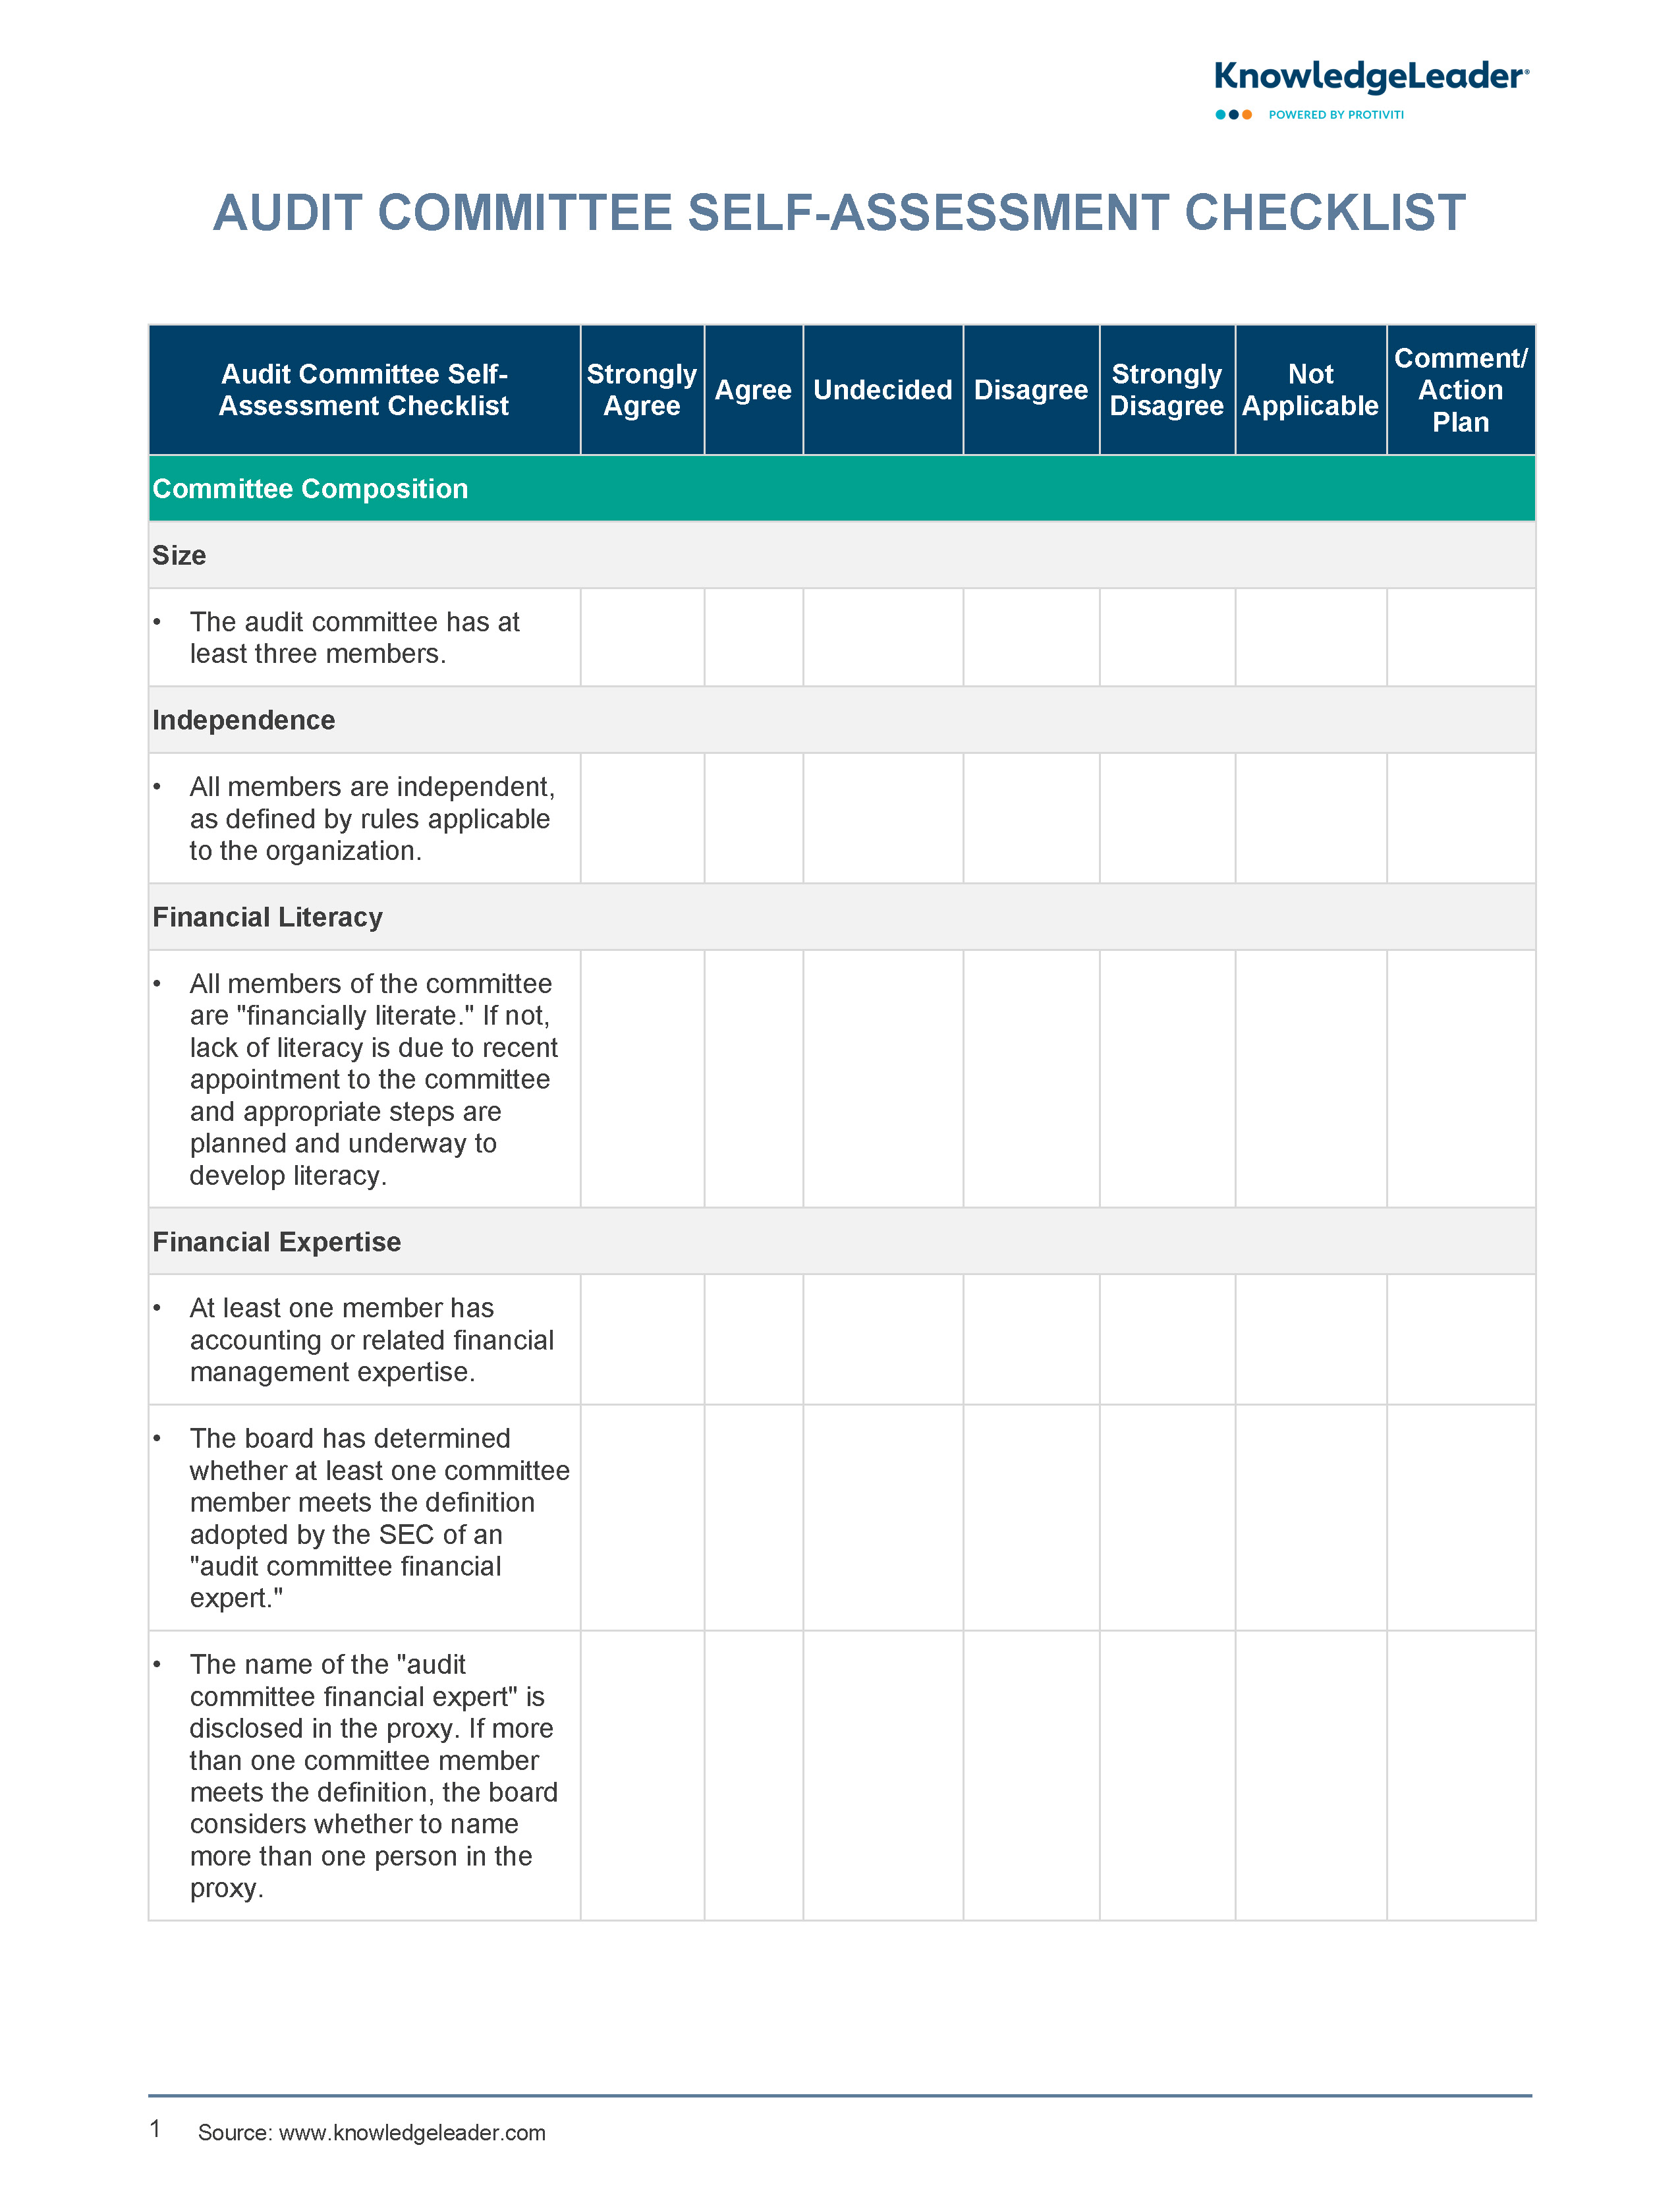 Screenshot of the first page of Audit Committee Self-Assessment Checklist